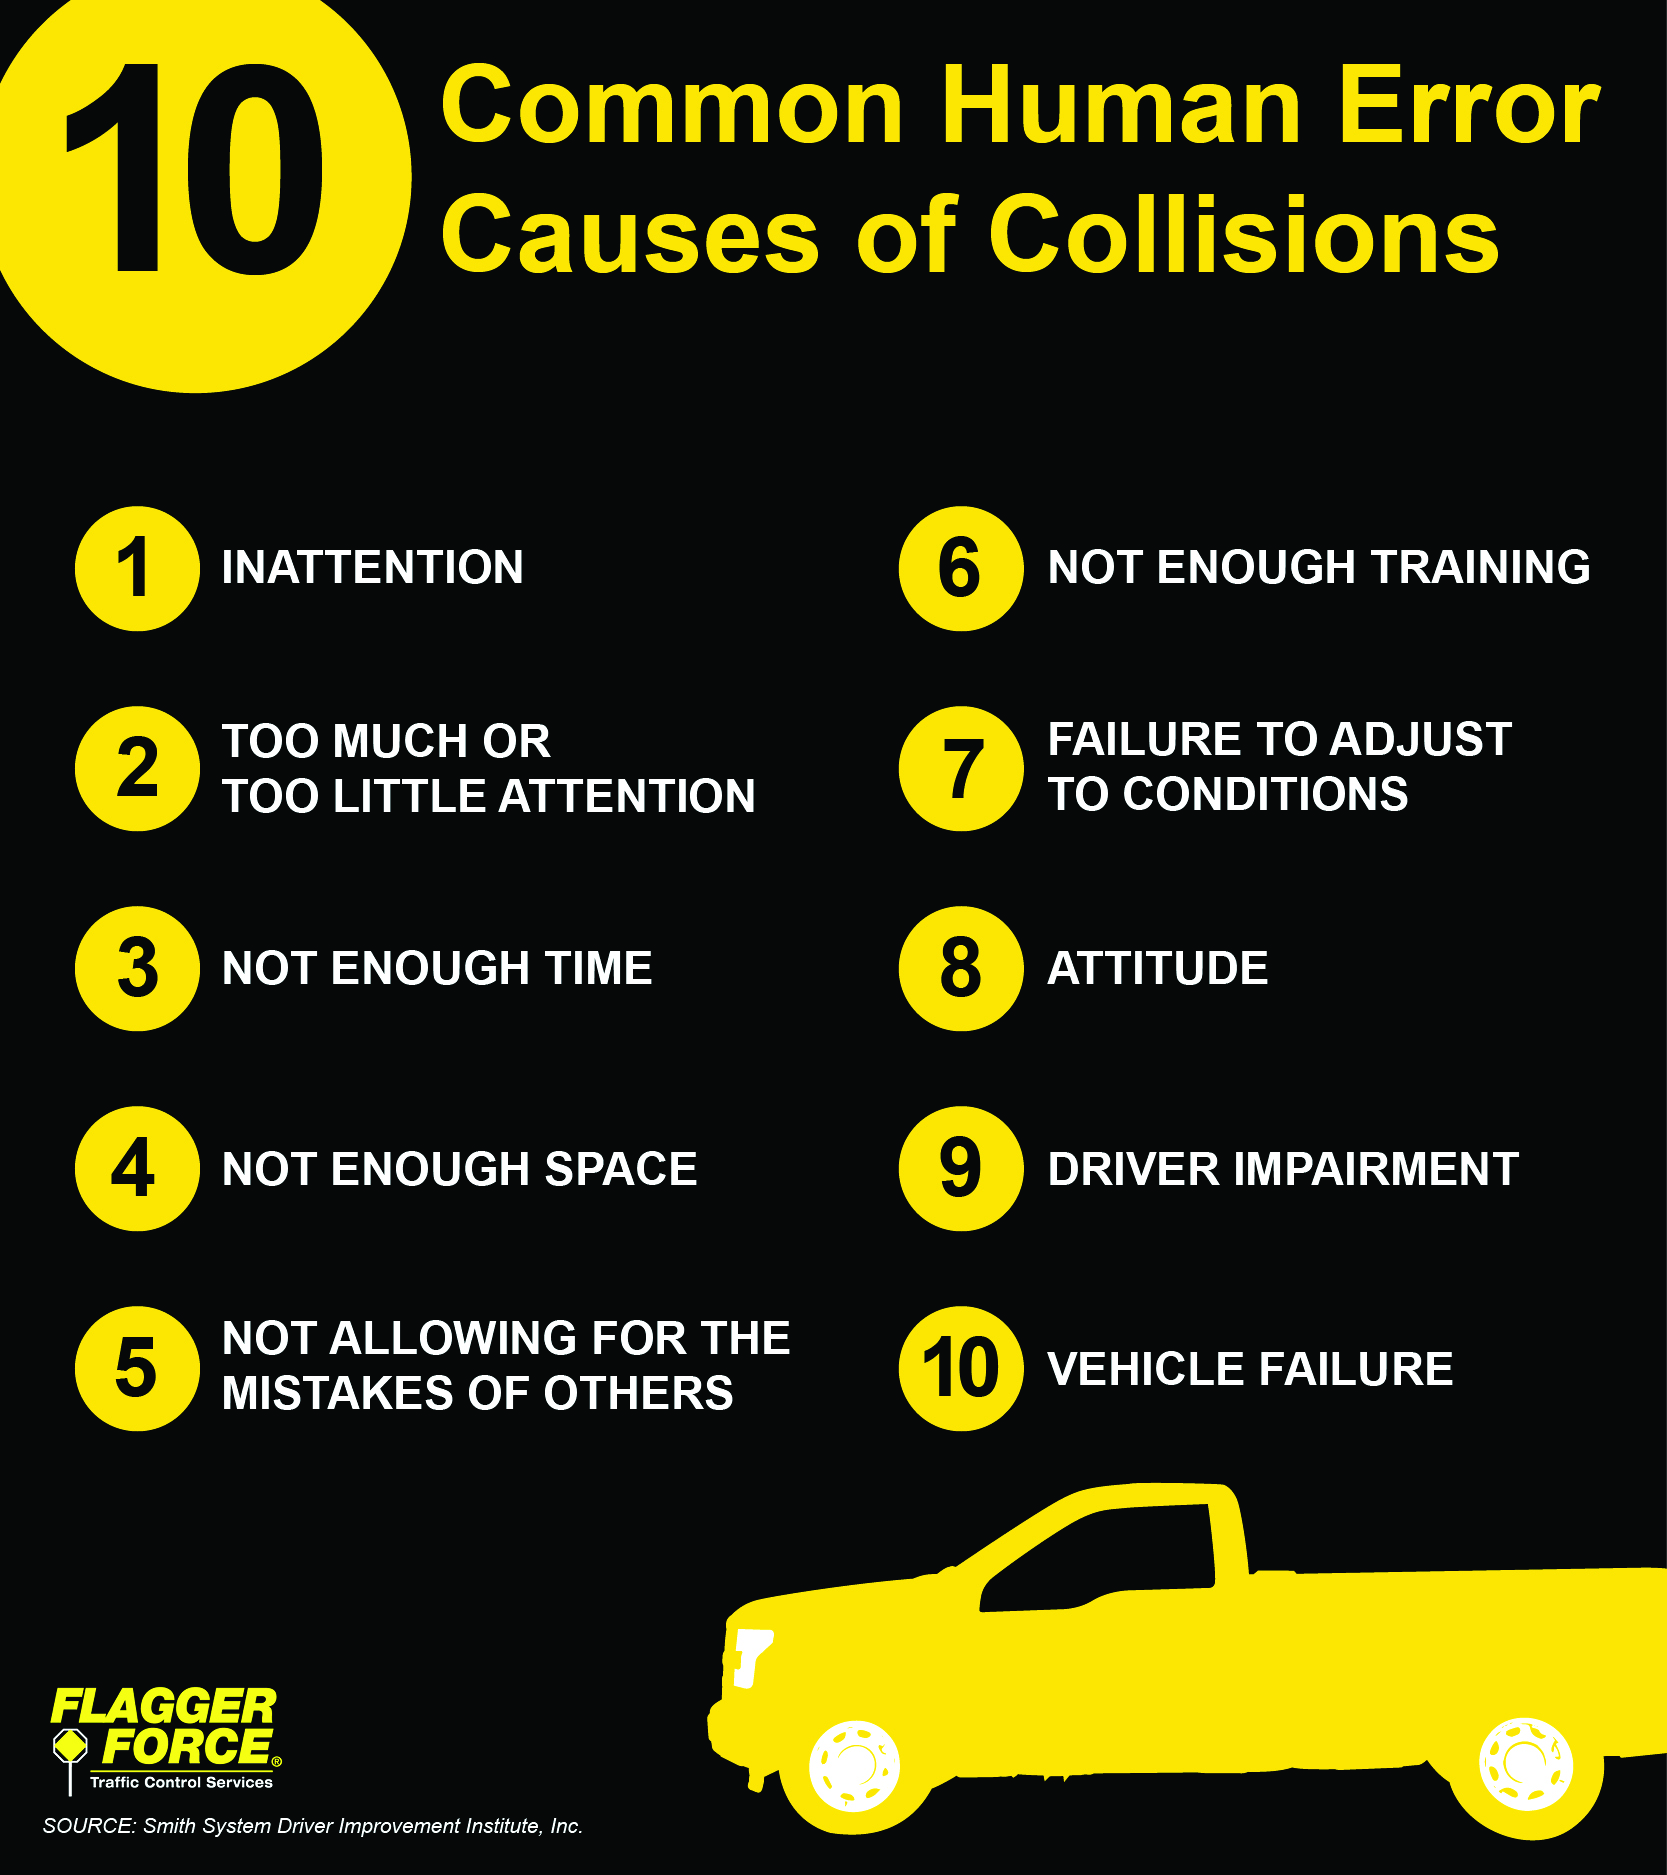 https://www.businessquest.co.ke/wp-content/uploads/2023/07/Infographic_10CausesOfCollisions_150ppi.jpg